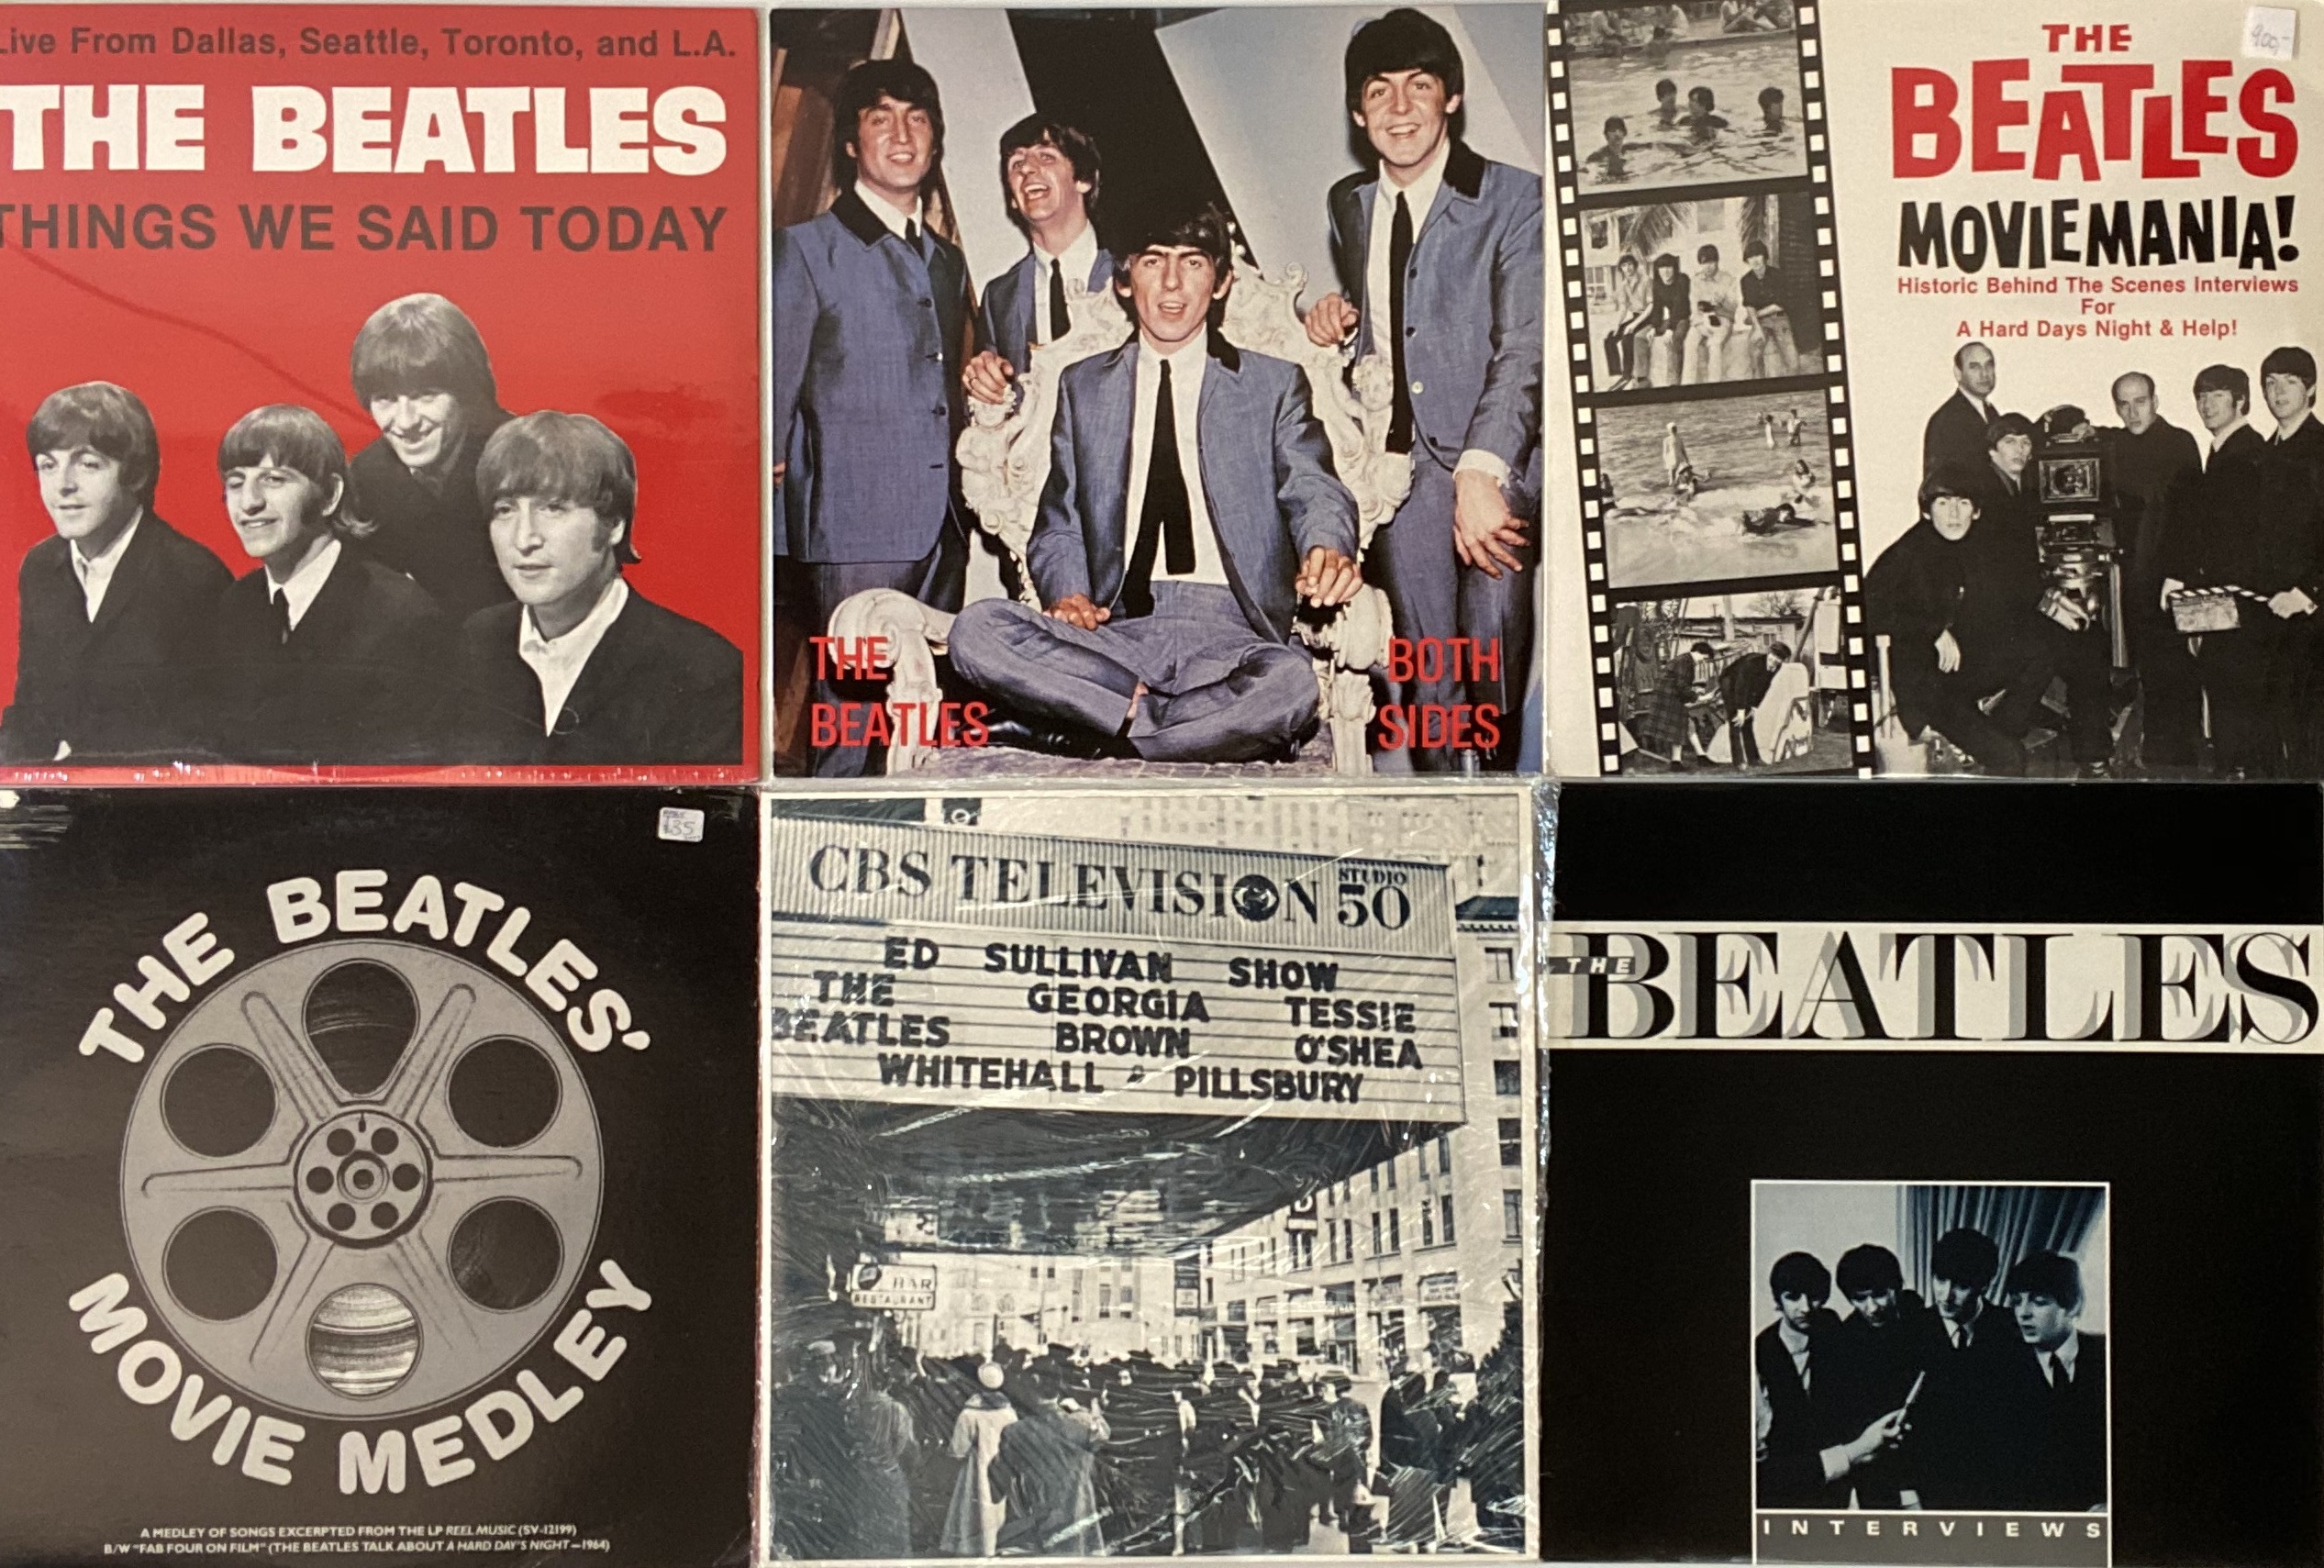 THE BEATLES - PRIVATE PRESSING LPS.